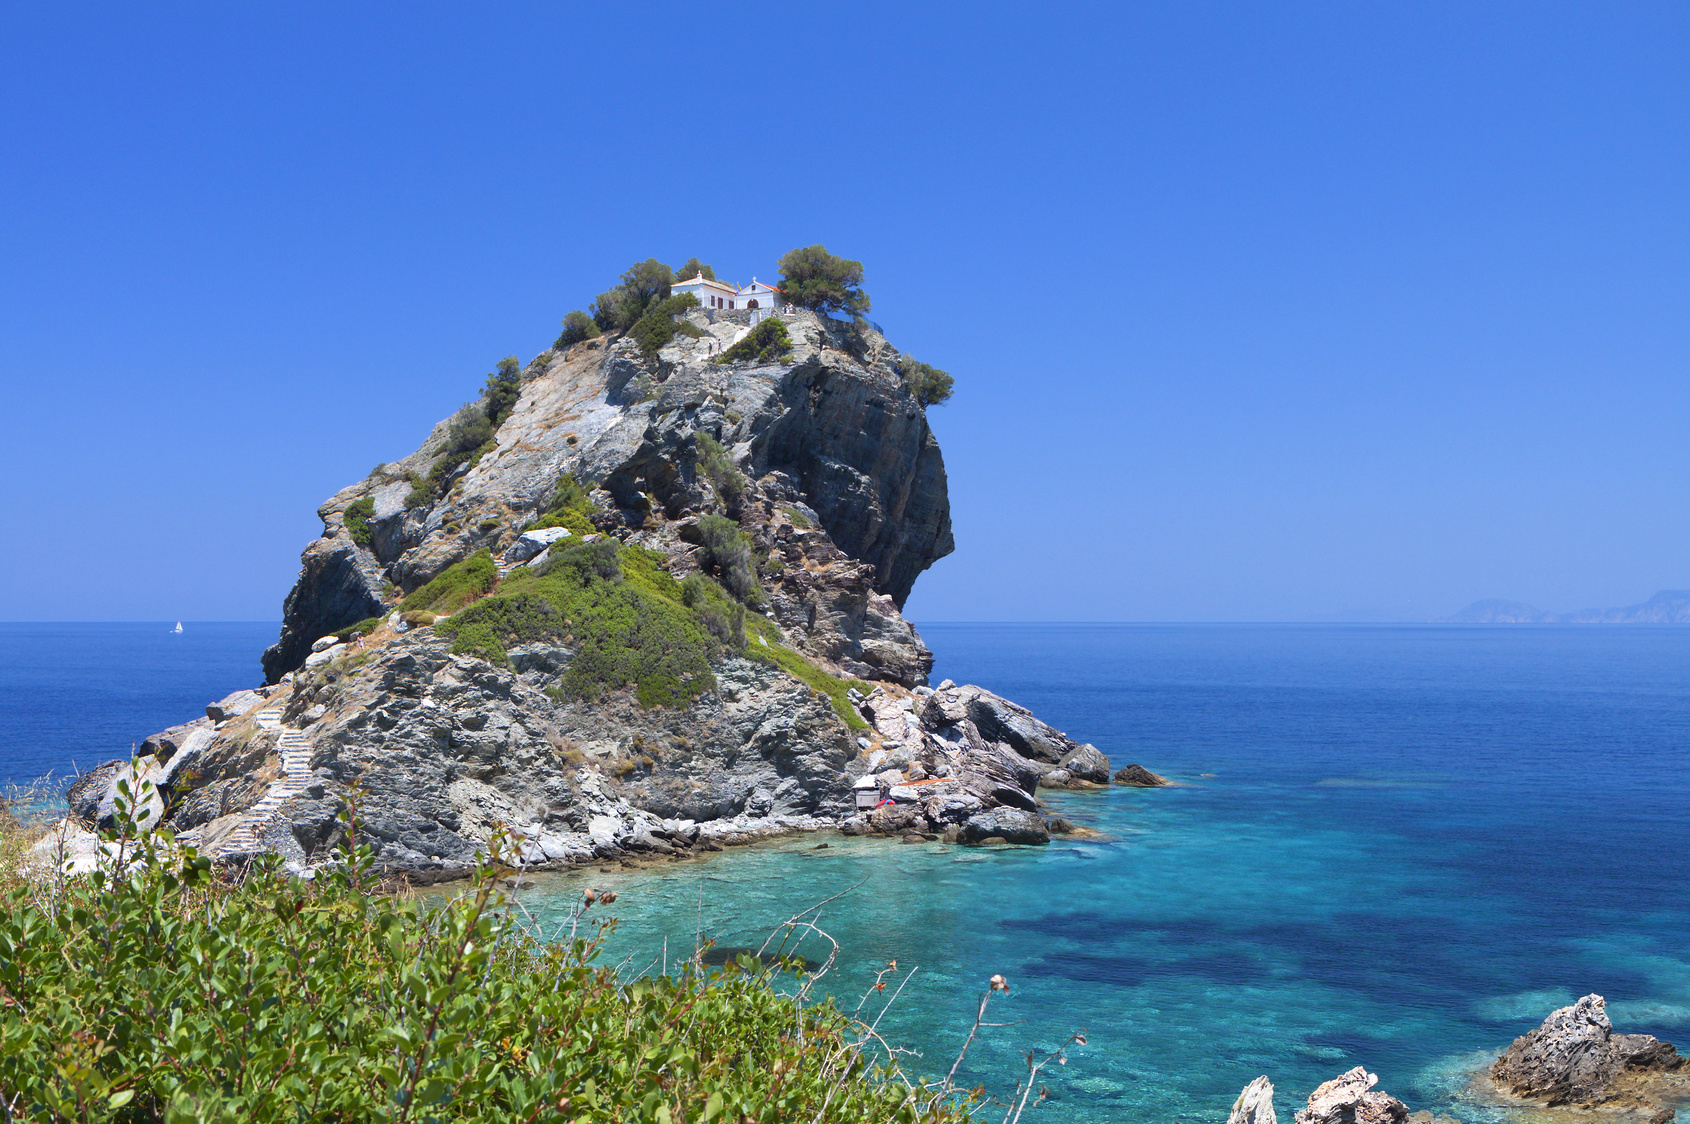 Kastri, Agios Ioannis: Top things to see & do at Skopelos | YourGreekIsland